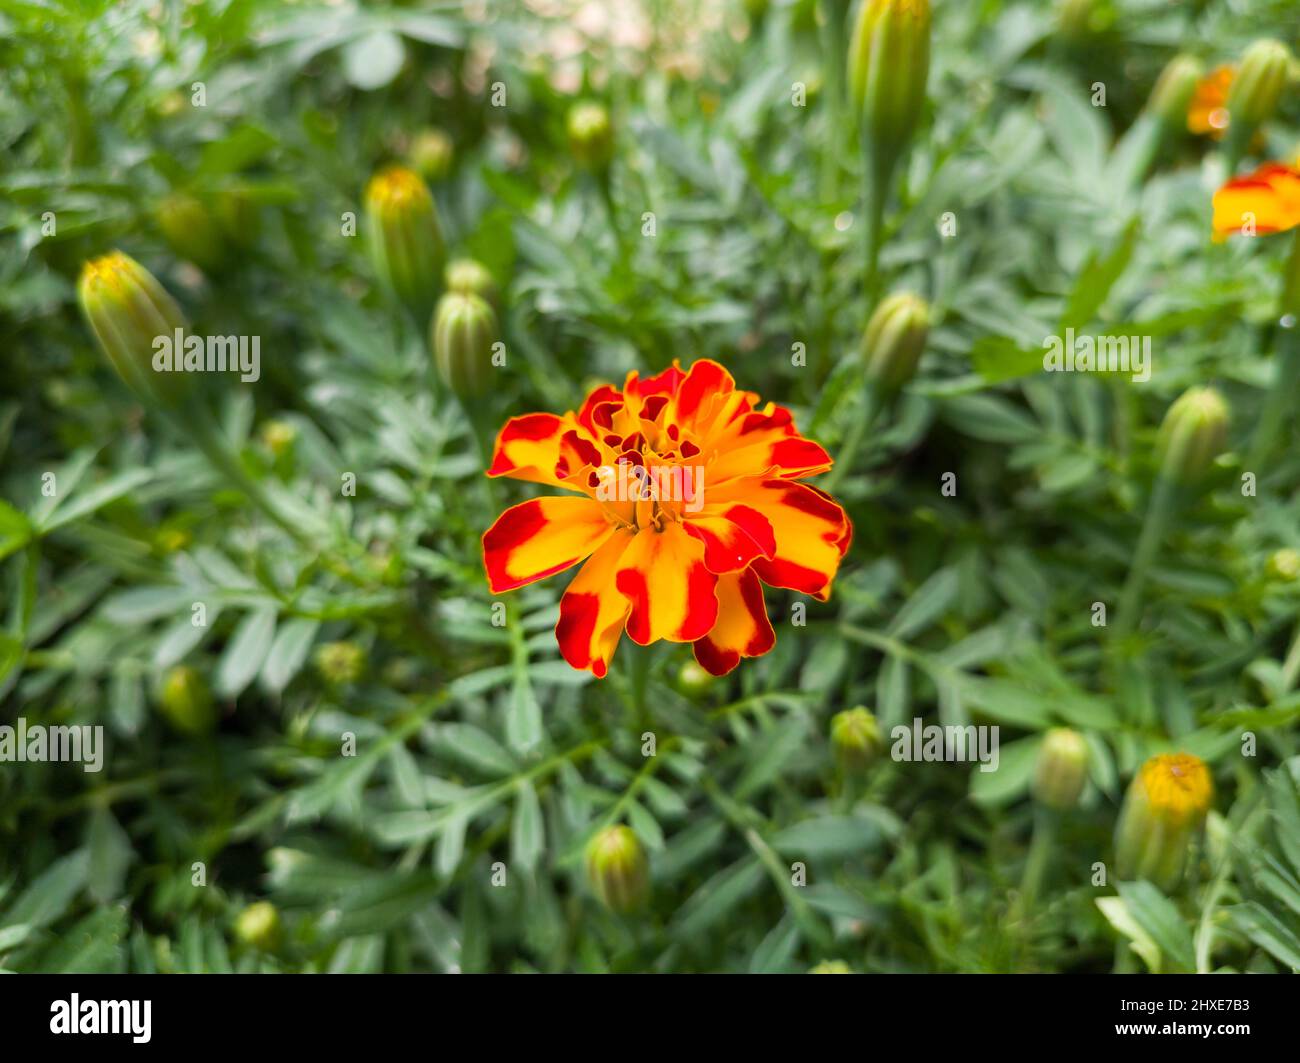 french marigold in the garden, tagetes patula, brightly colored golden yellow flower taken in shallow depth of field, copy space Stock Photo